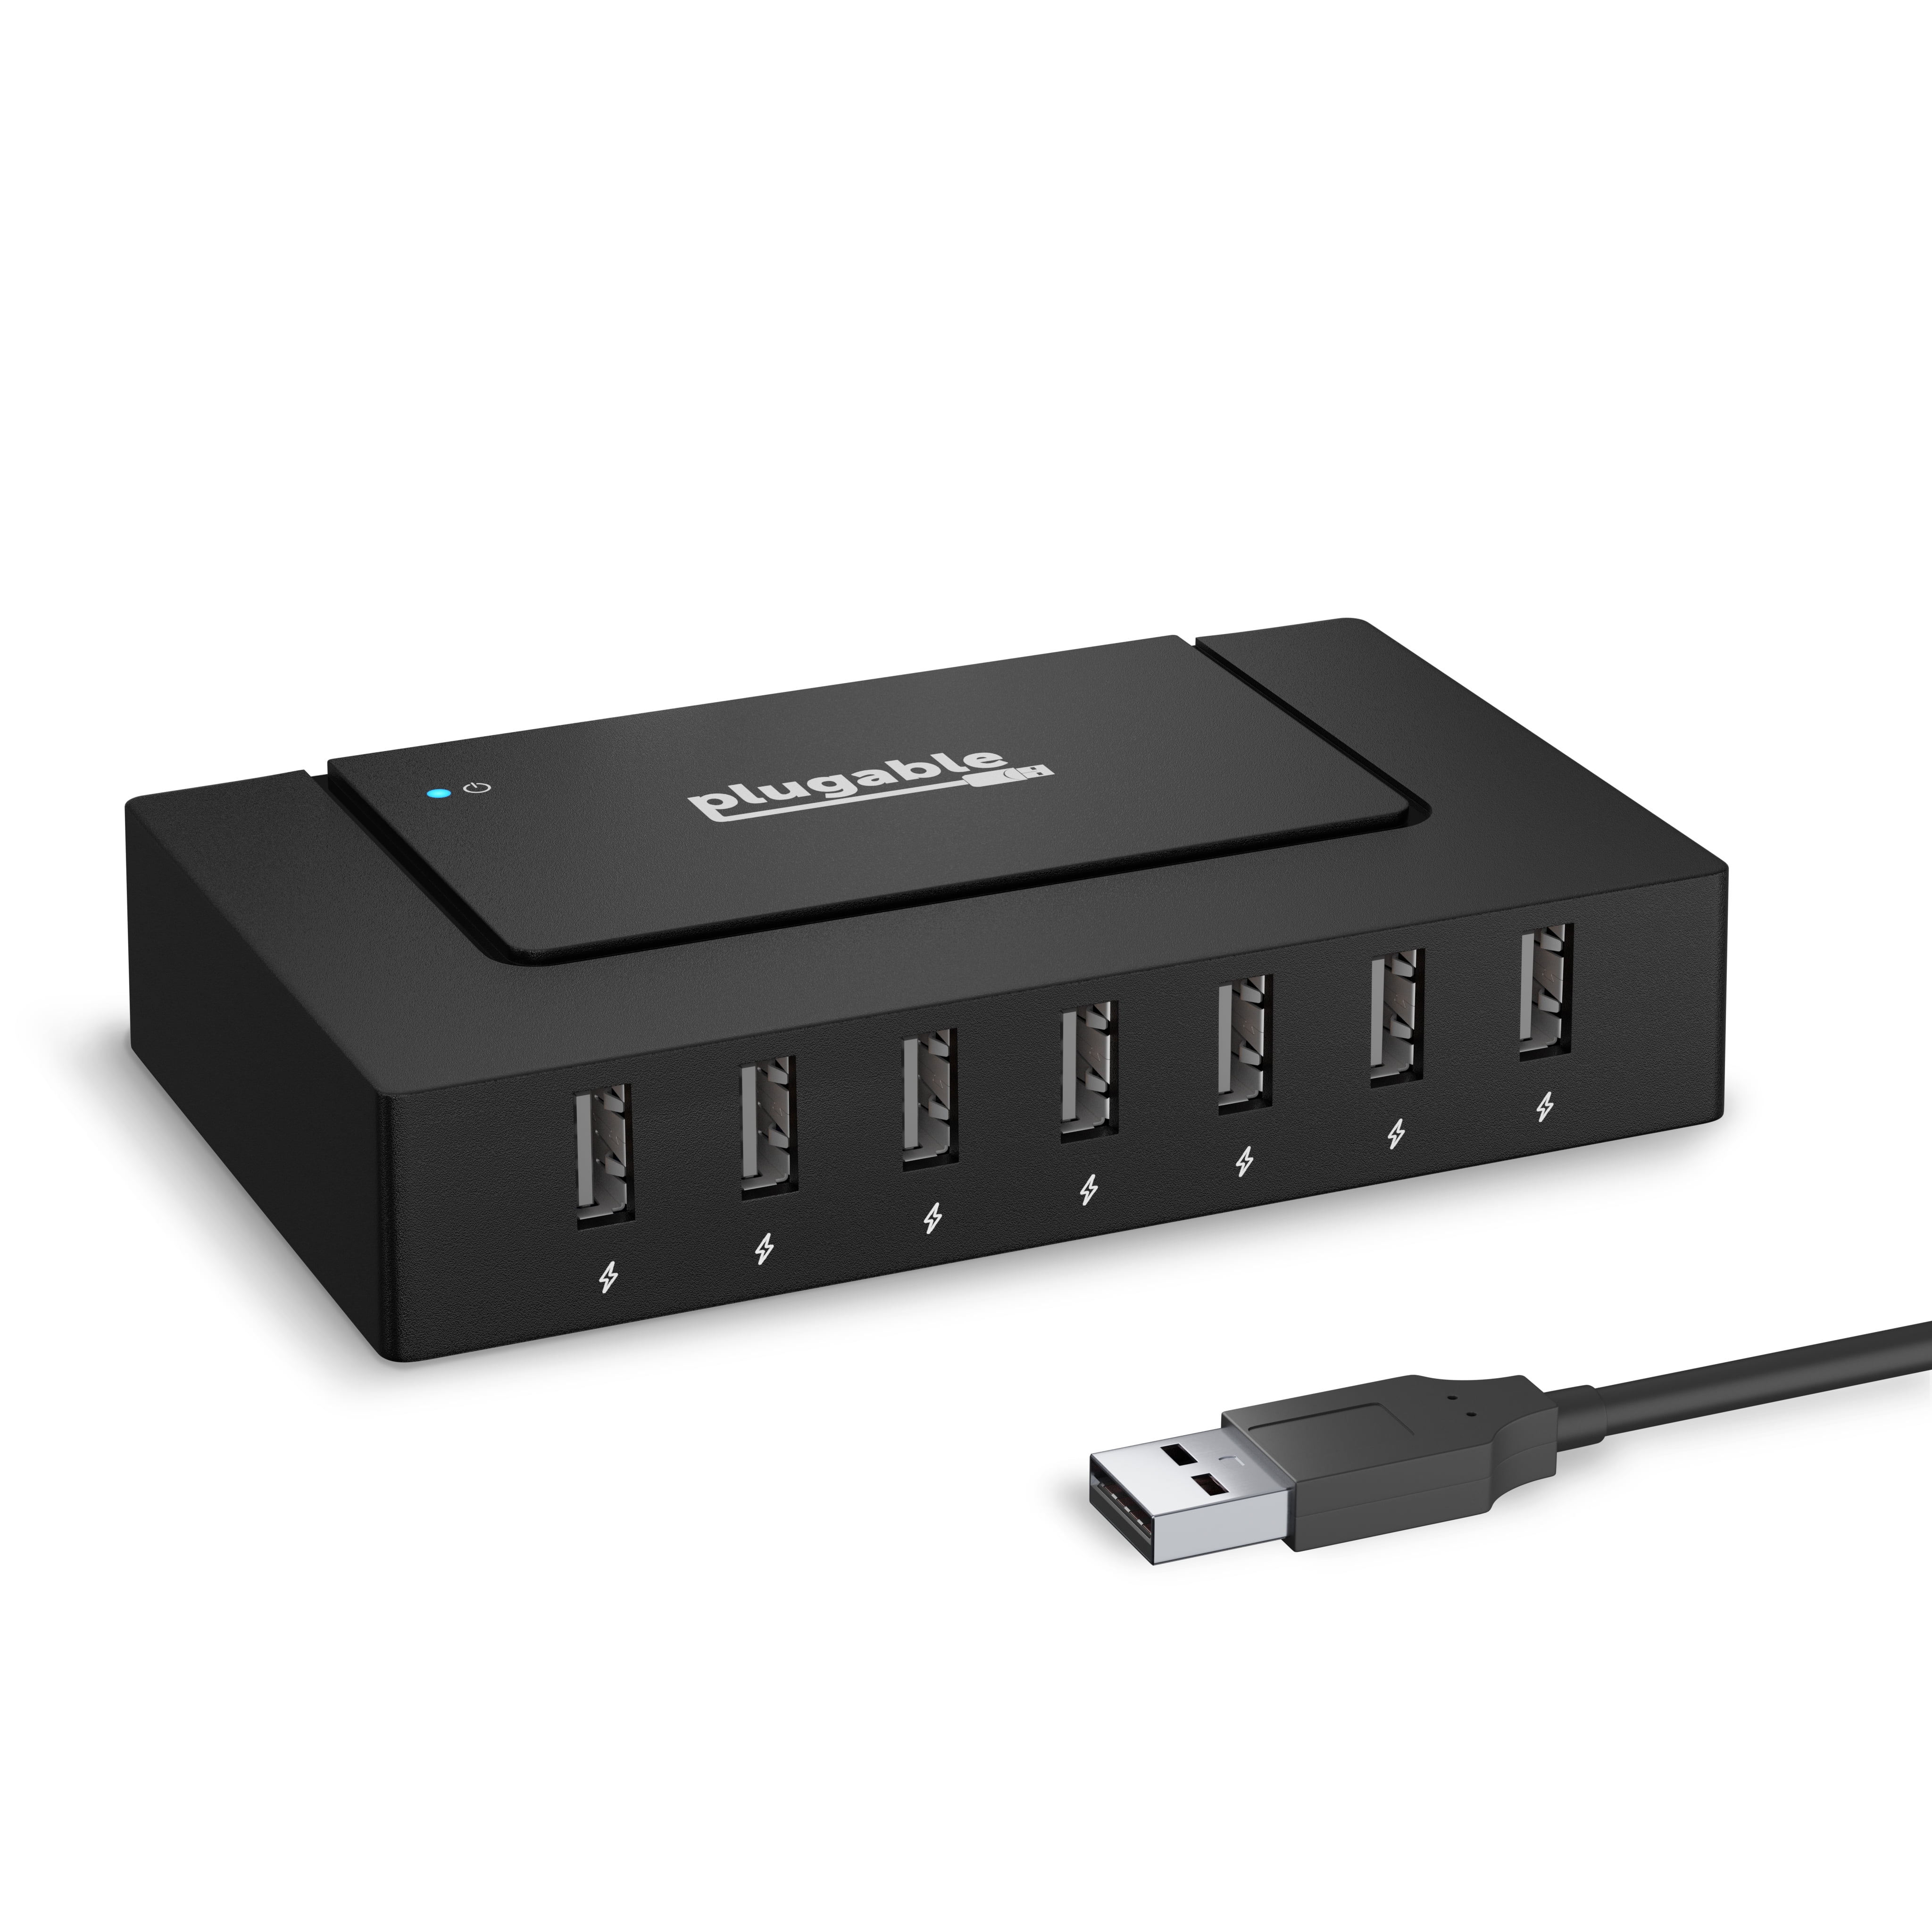 7 Port USB Hub - Plugable USB Hub for Multiple Devices and USB 2.0 Data Transfer with a 60W Power Adapter